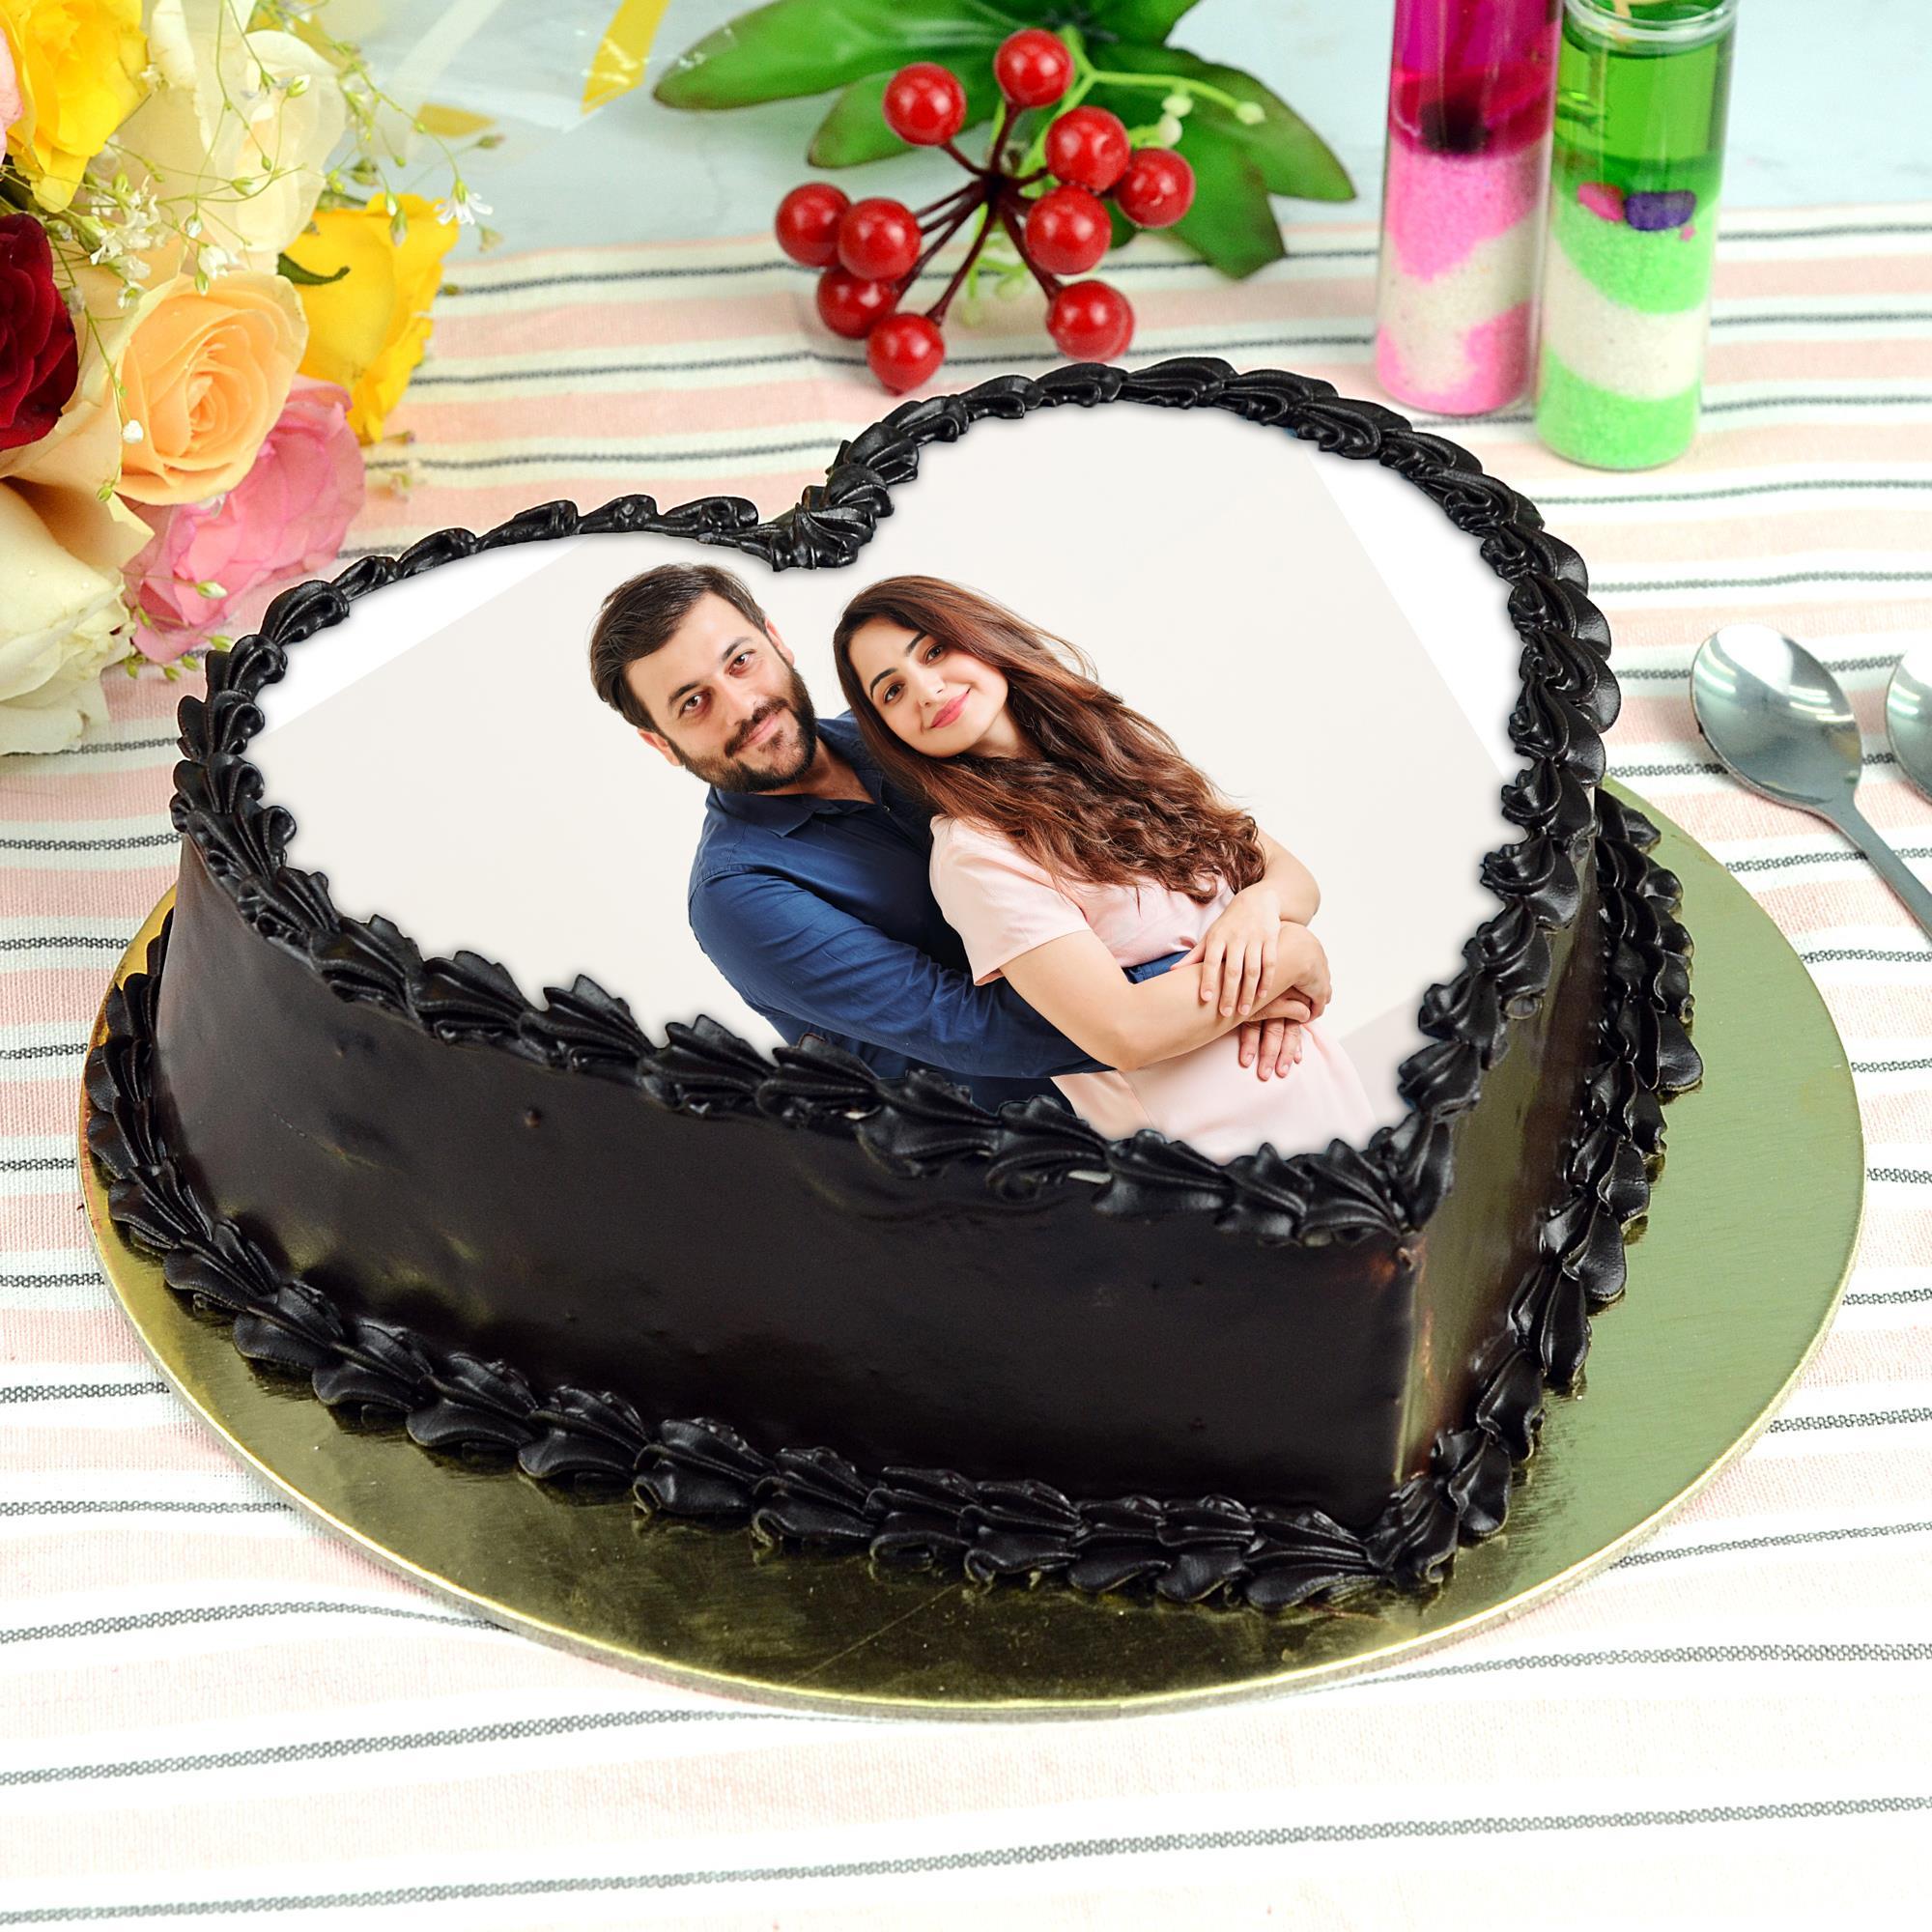 Buy Professional Cake Decorating Tools Online in India